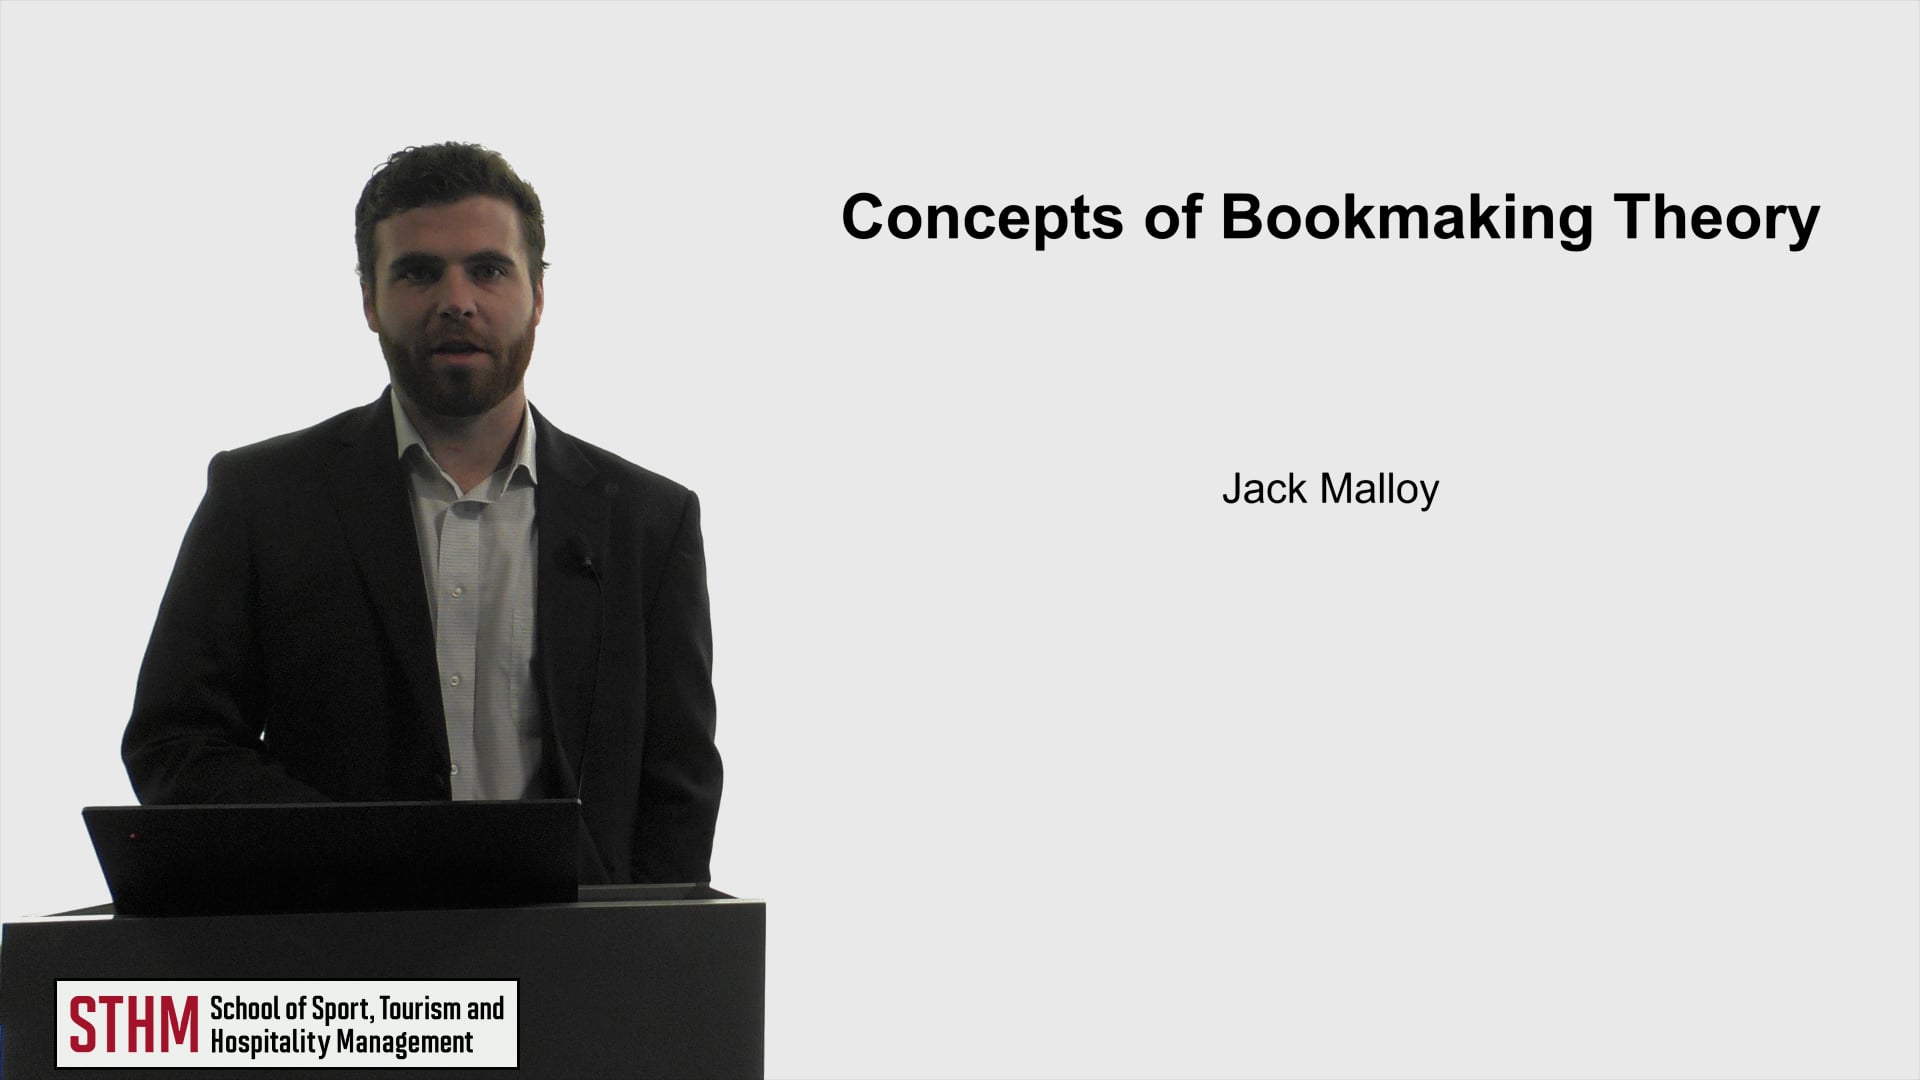 Concepts of Bookmaking Theory